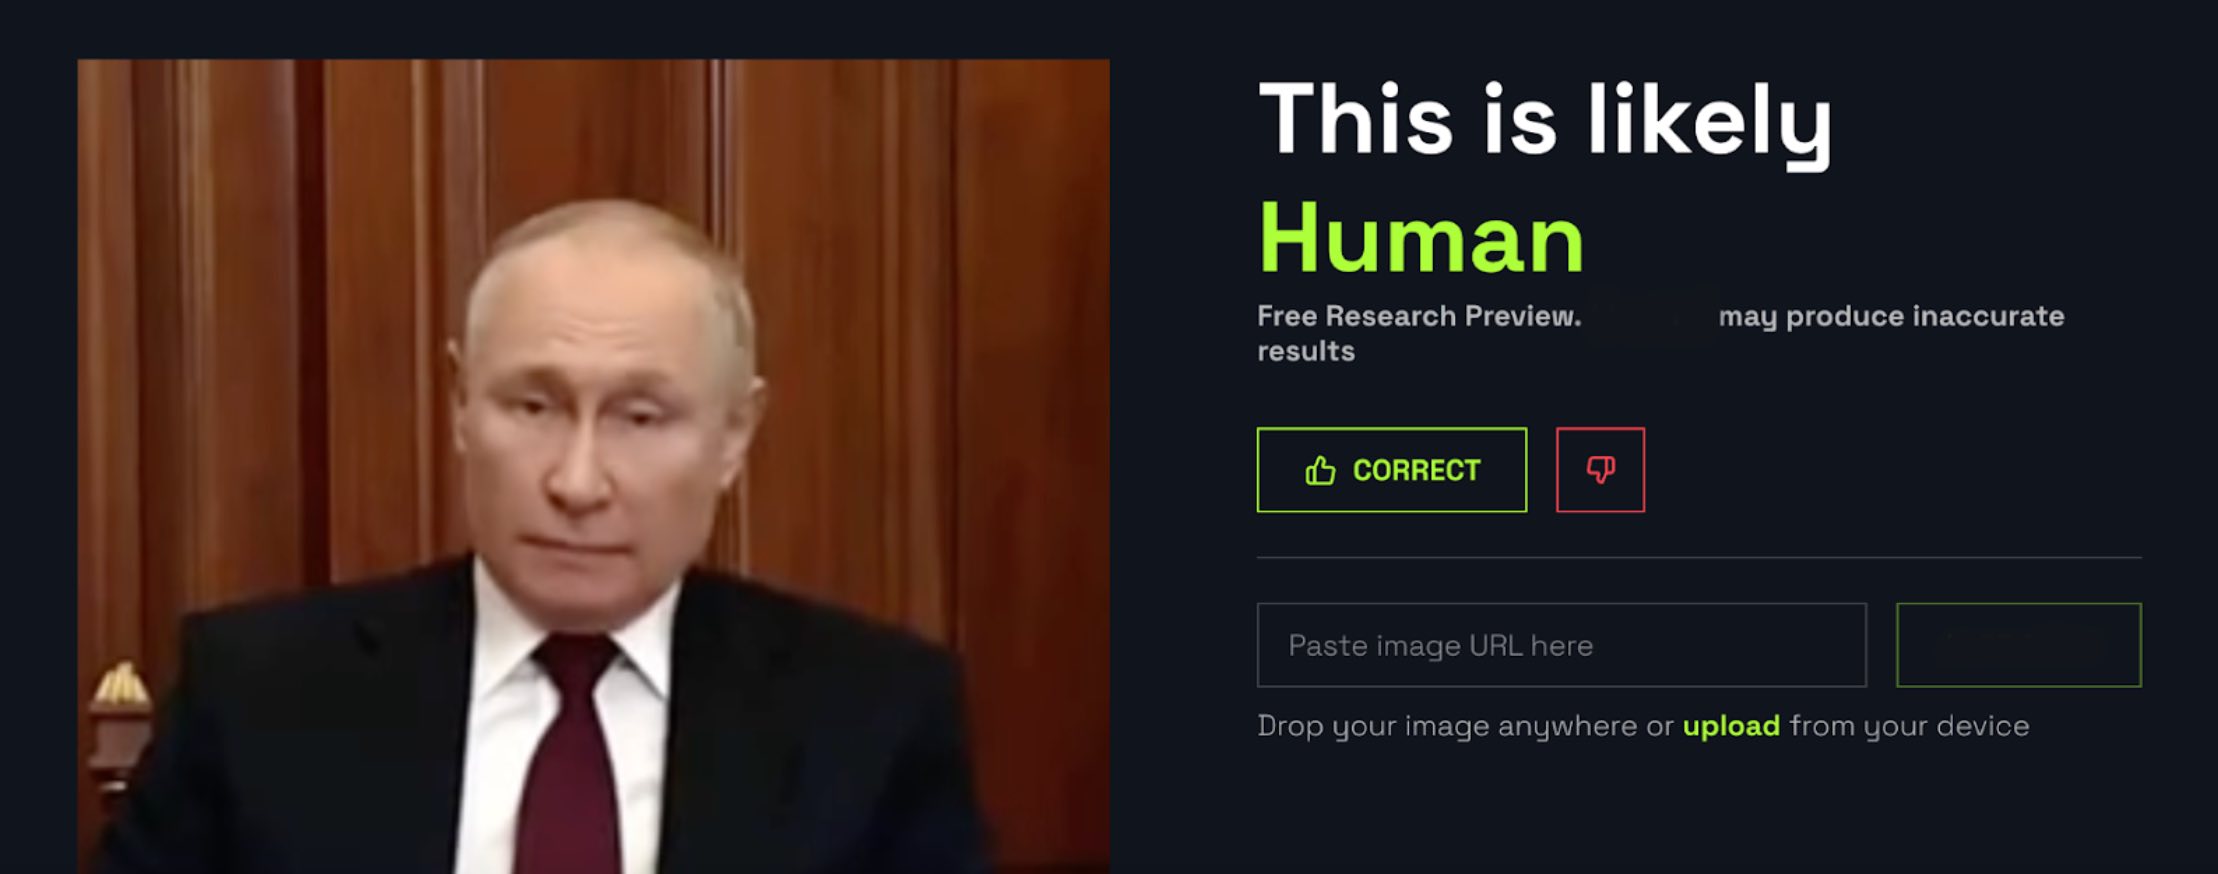 A screenshot of Putin’s deepfake was detected as likely to be real, using a detection tool trained for detecting AI images but not for spotting deepfake videos created by swapping people’s faces.